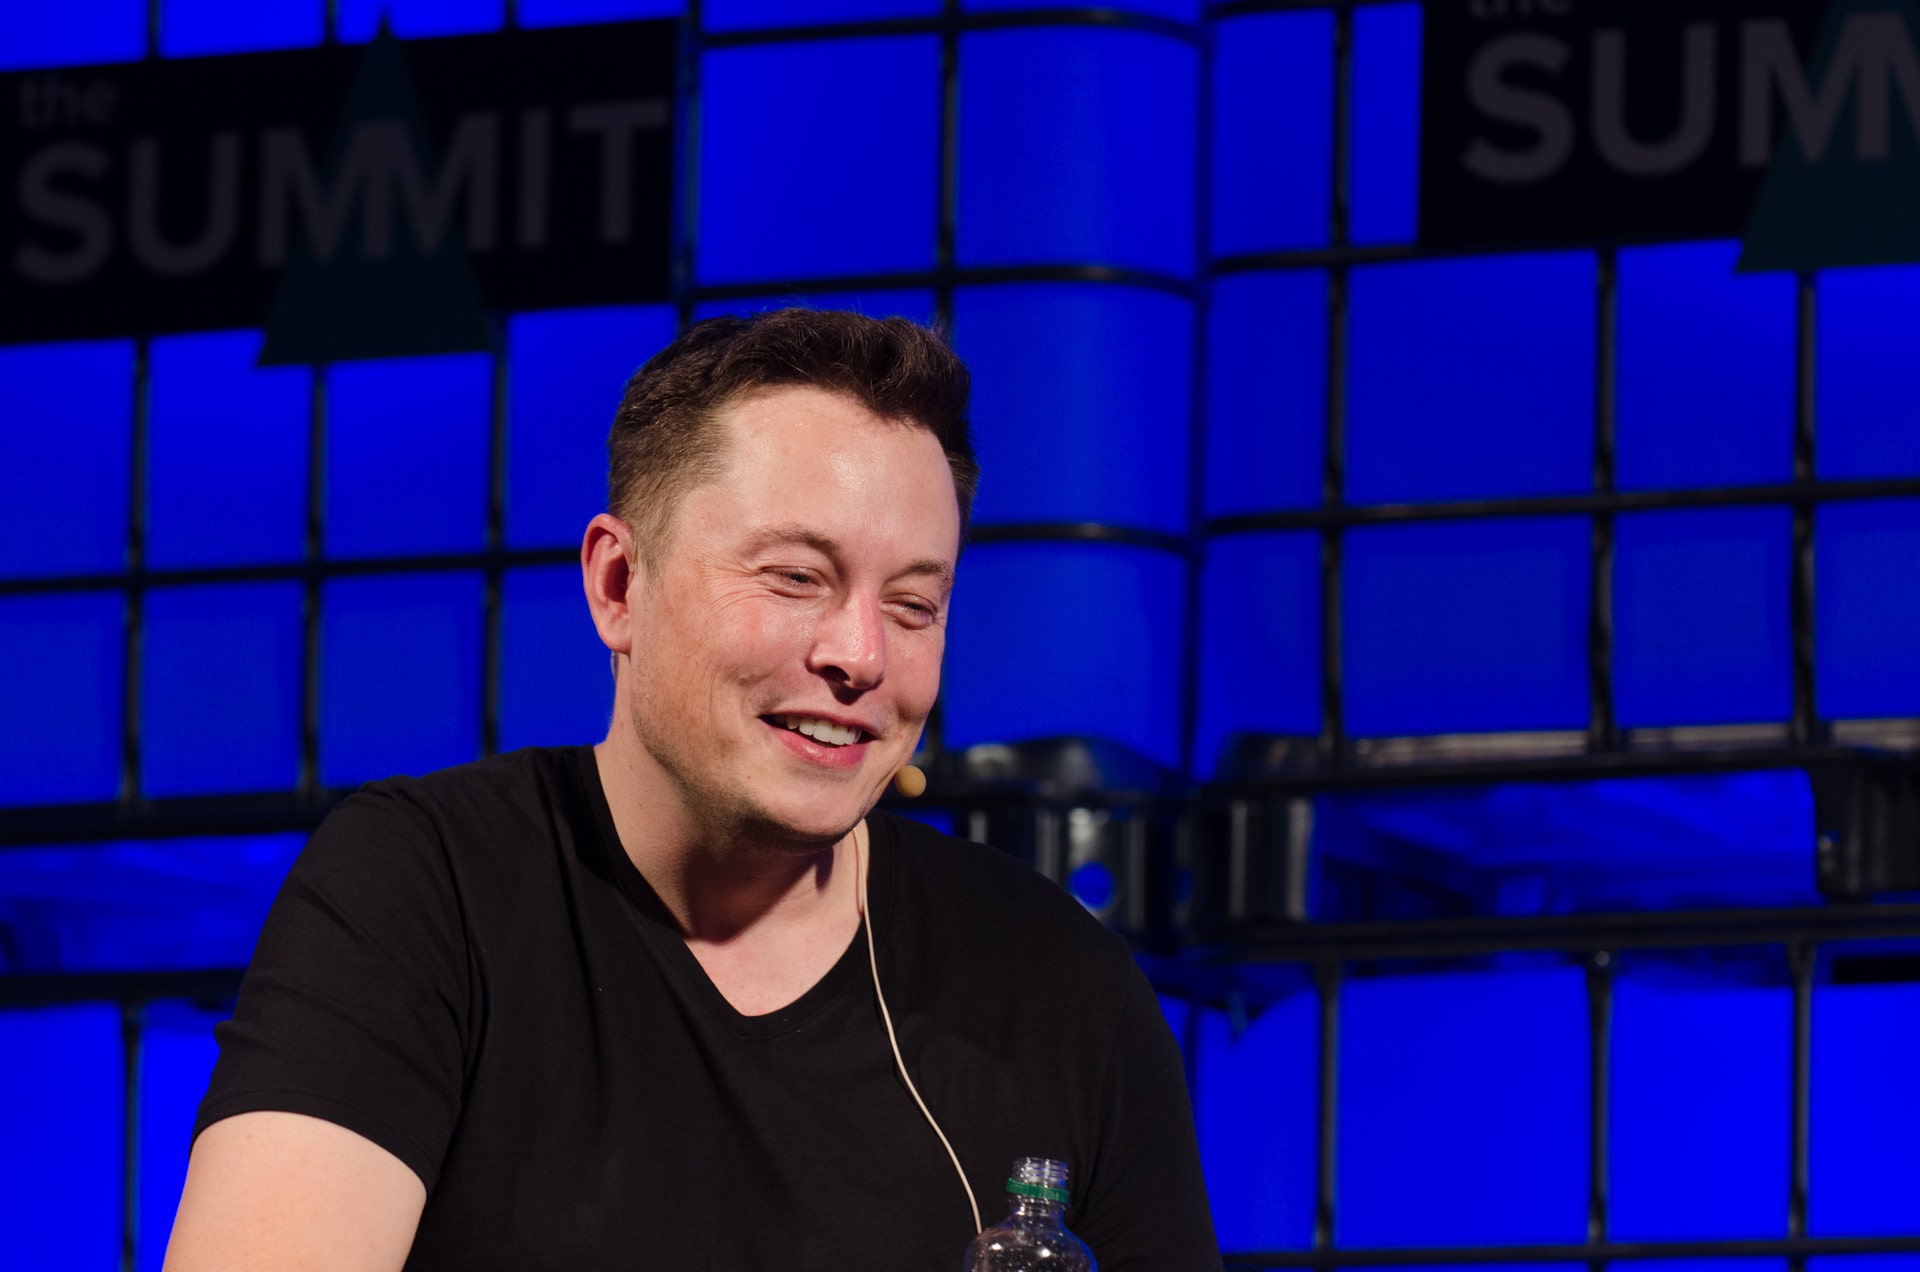 Elon Musk Caused Bitcoin To Slump And Dogecoin To Rise In Q2, Shows Analysis